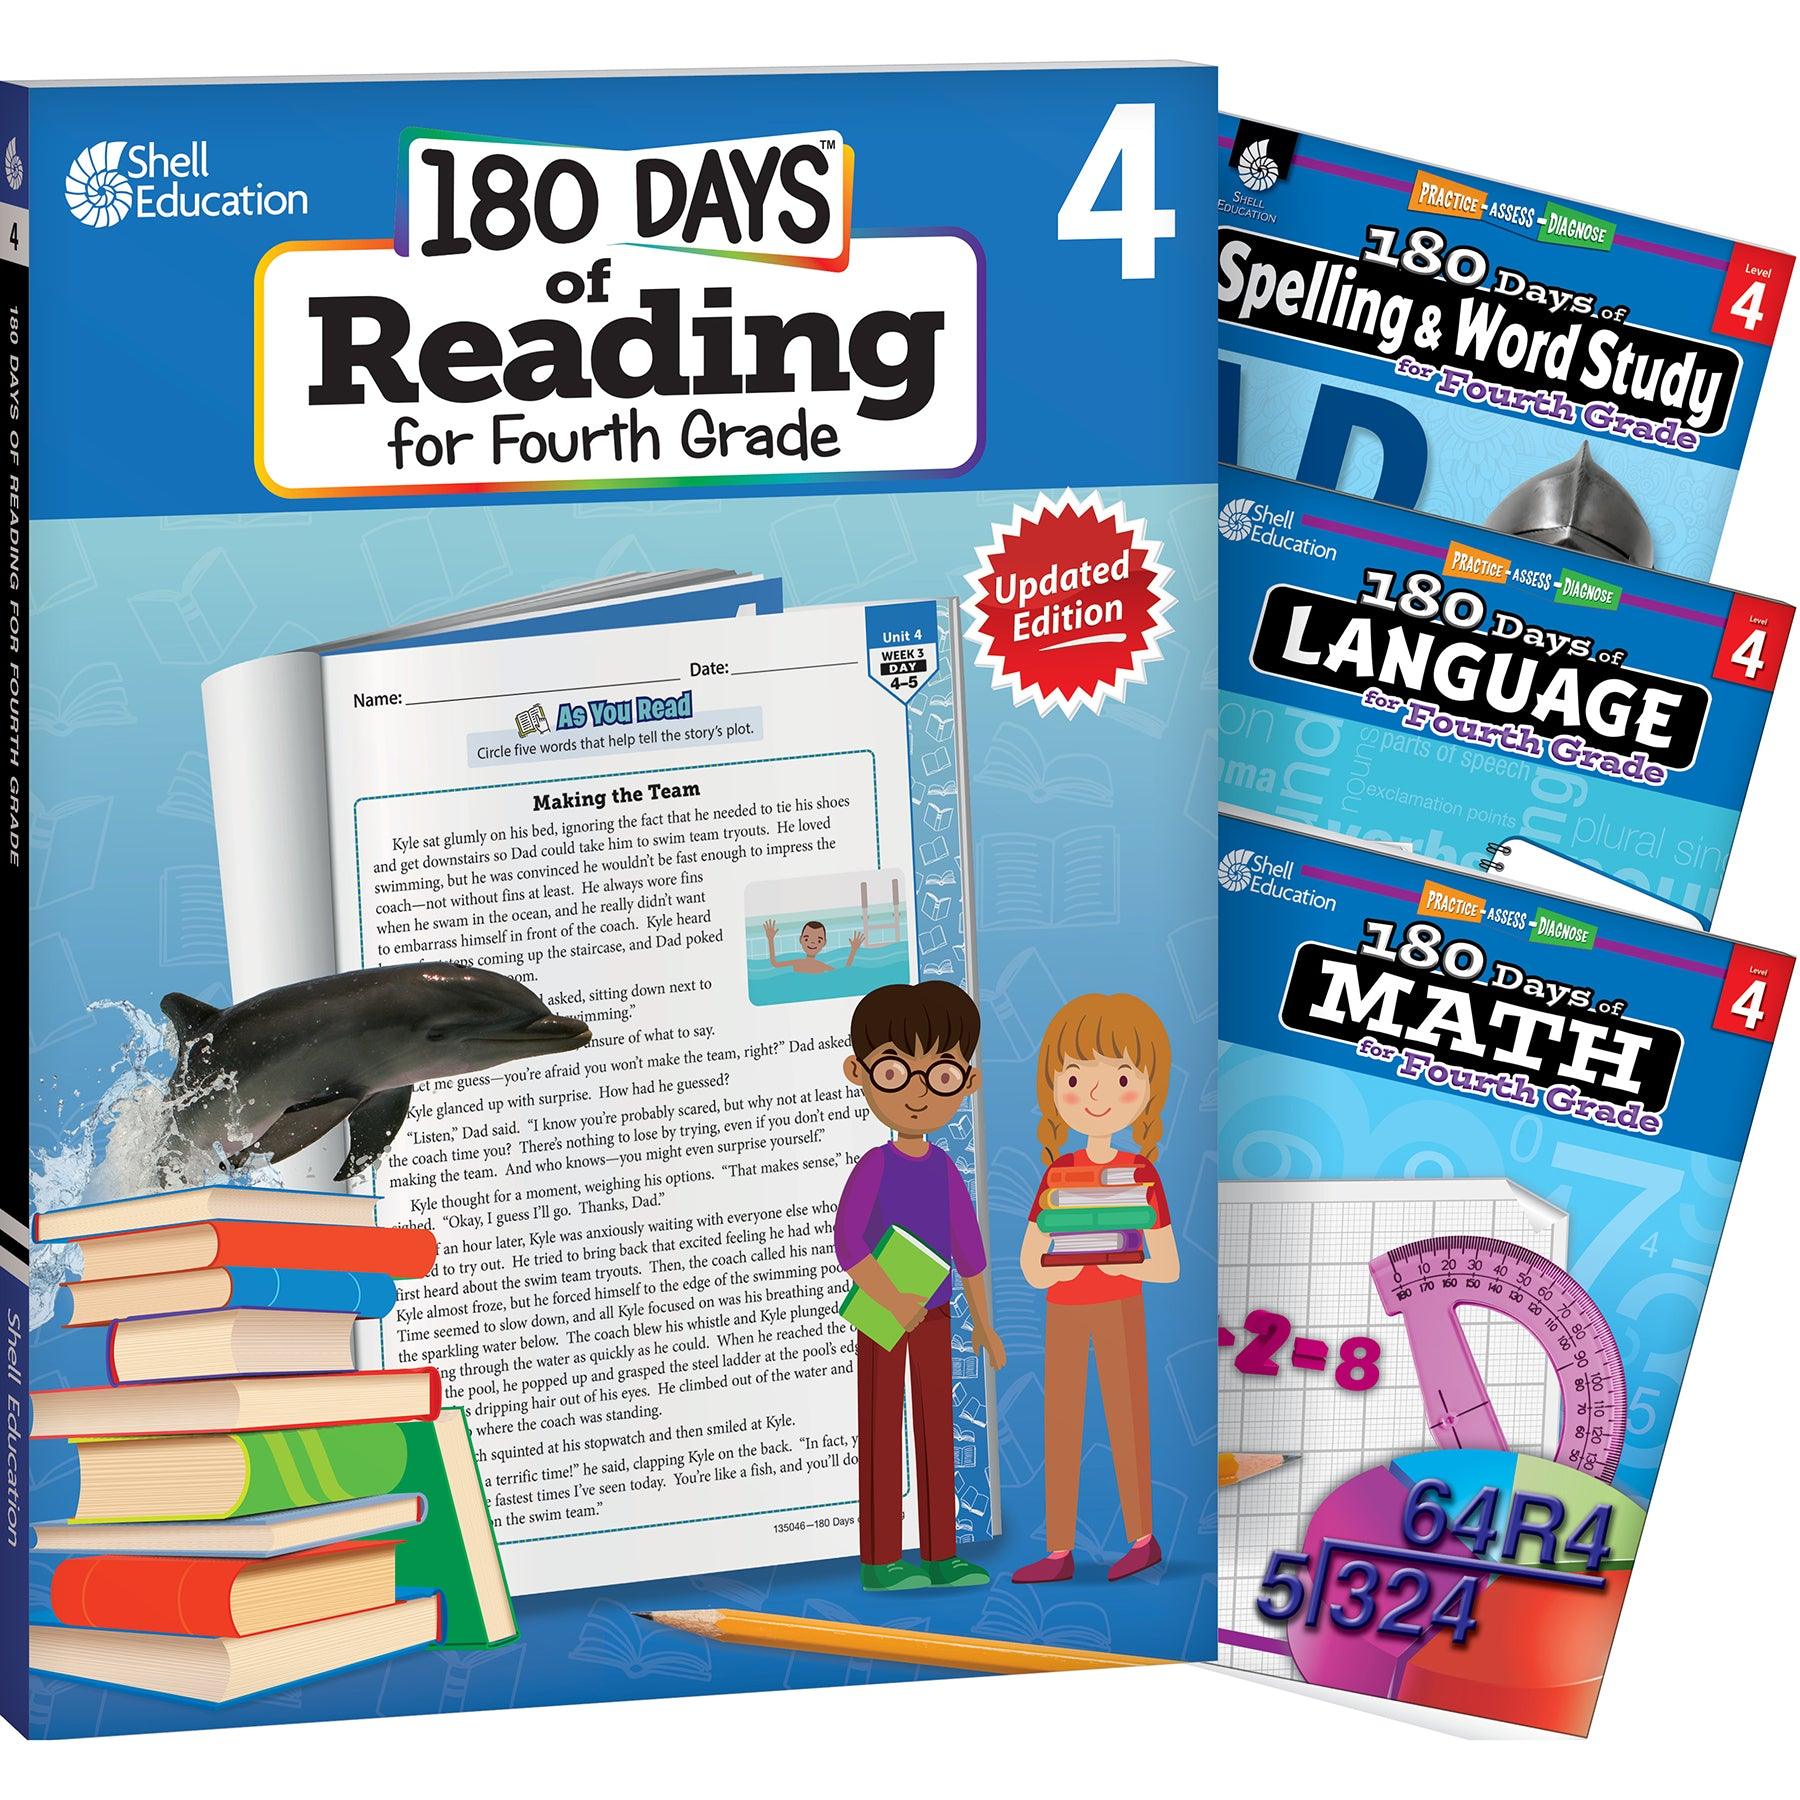 180 Days of Practice Reading, Spelling, Language, & Math for Forth Grade: 4-Book Set - Loomini